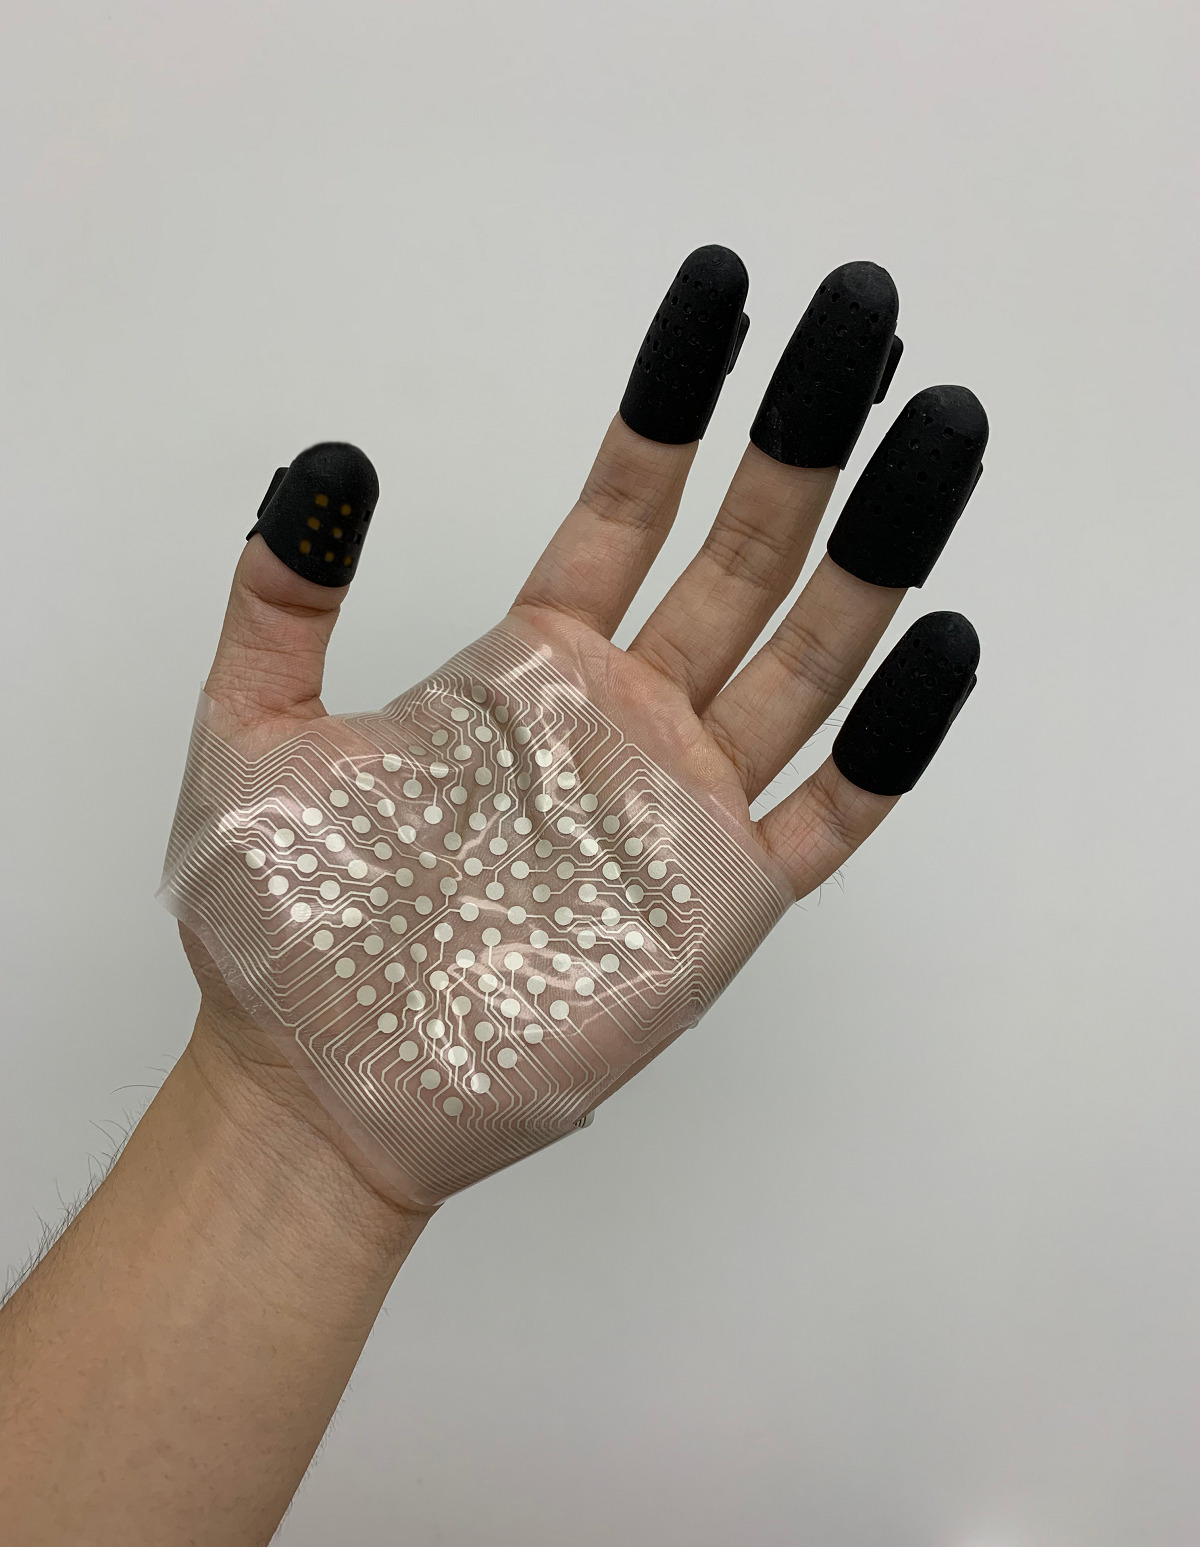 The new wearable tactile rendering system can mimic touch sensations with high spatial resolution and a rapid response rate.Photo credit: Robotics X Lab and City University of Hong Kong